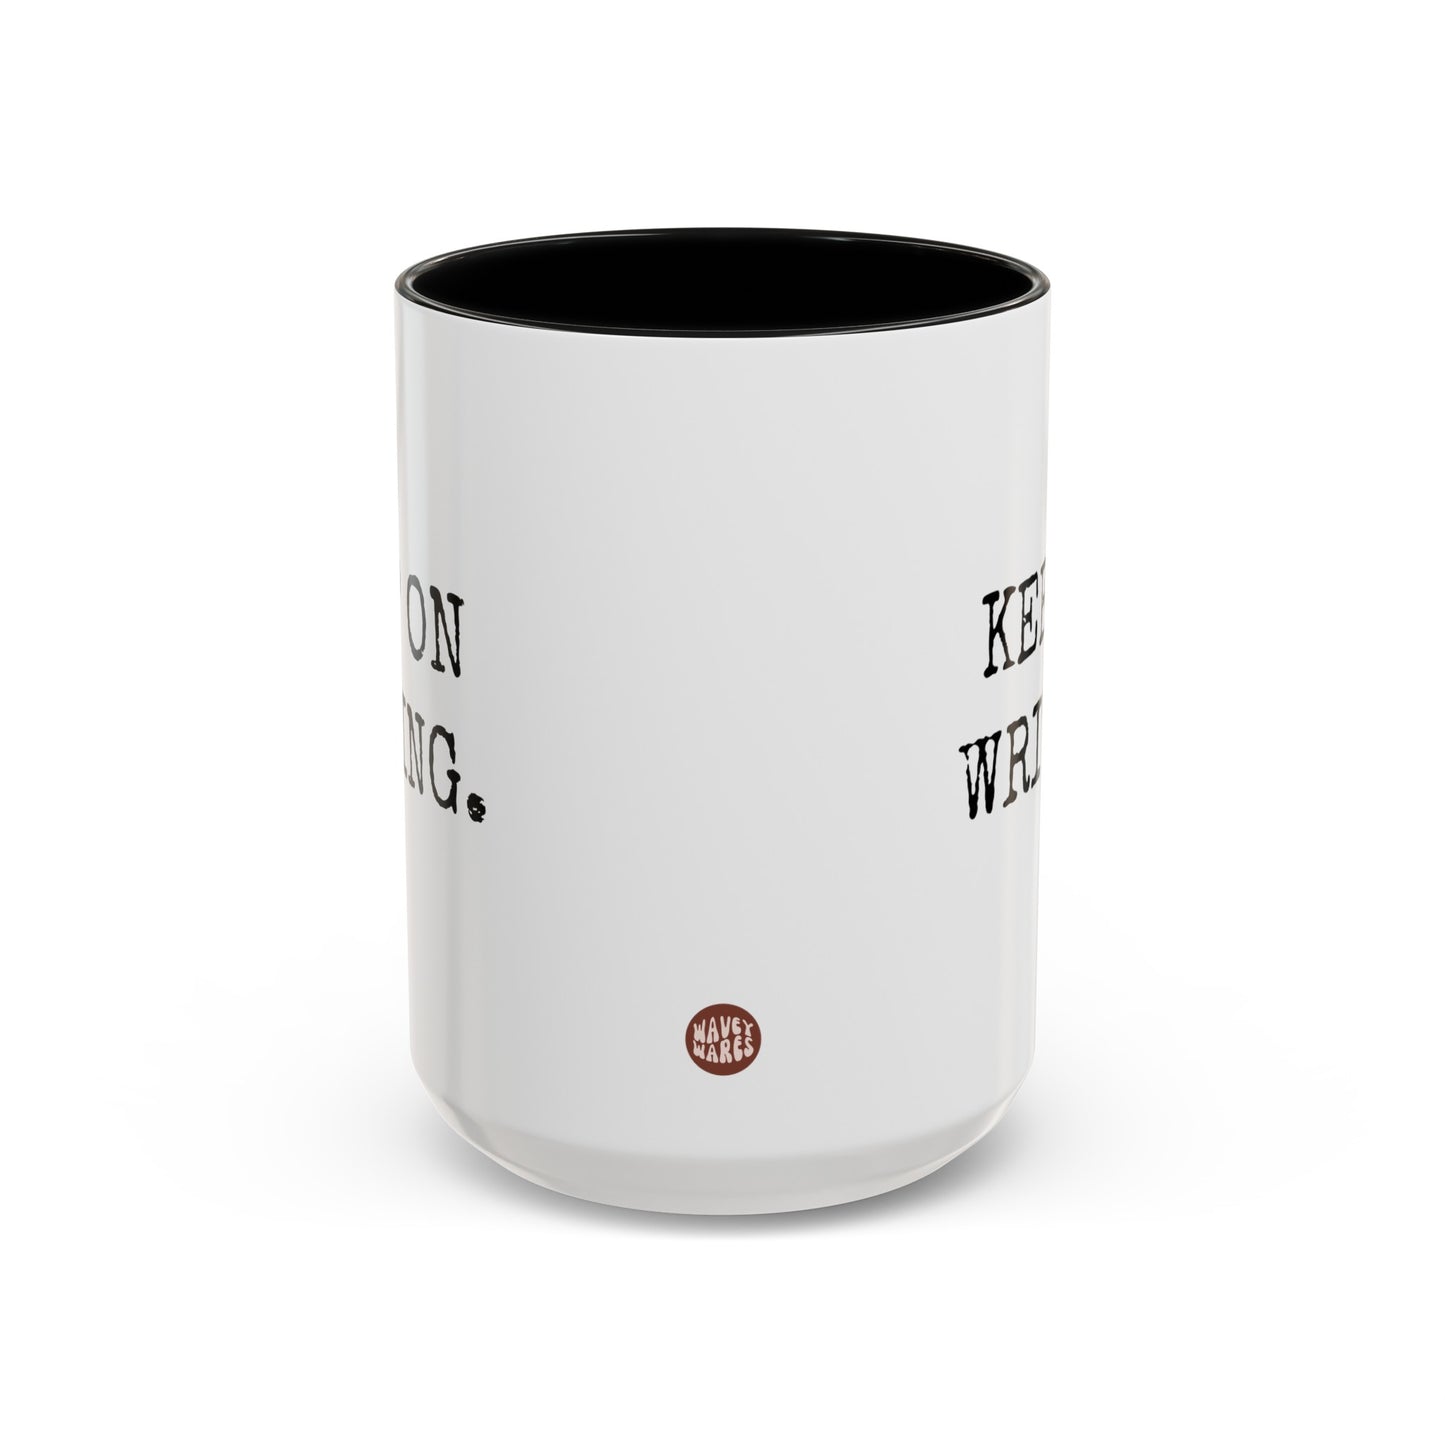 Keep On Writing 15oz white with black accent funny large coffee mug gift for aspiring journalist writer author vintage friend waveywares wavey wares wavywares wavy wares side